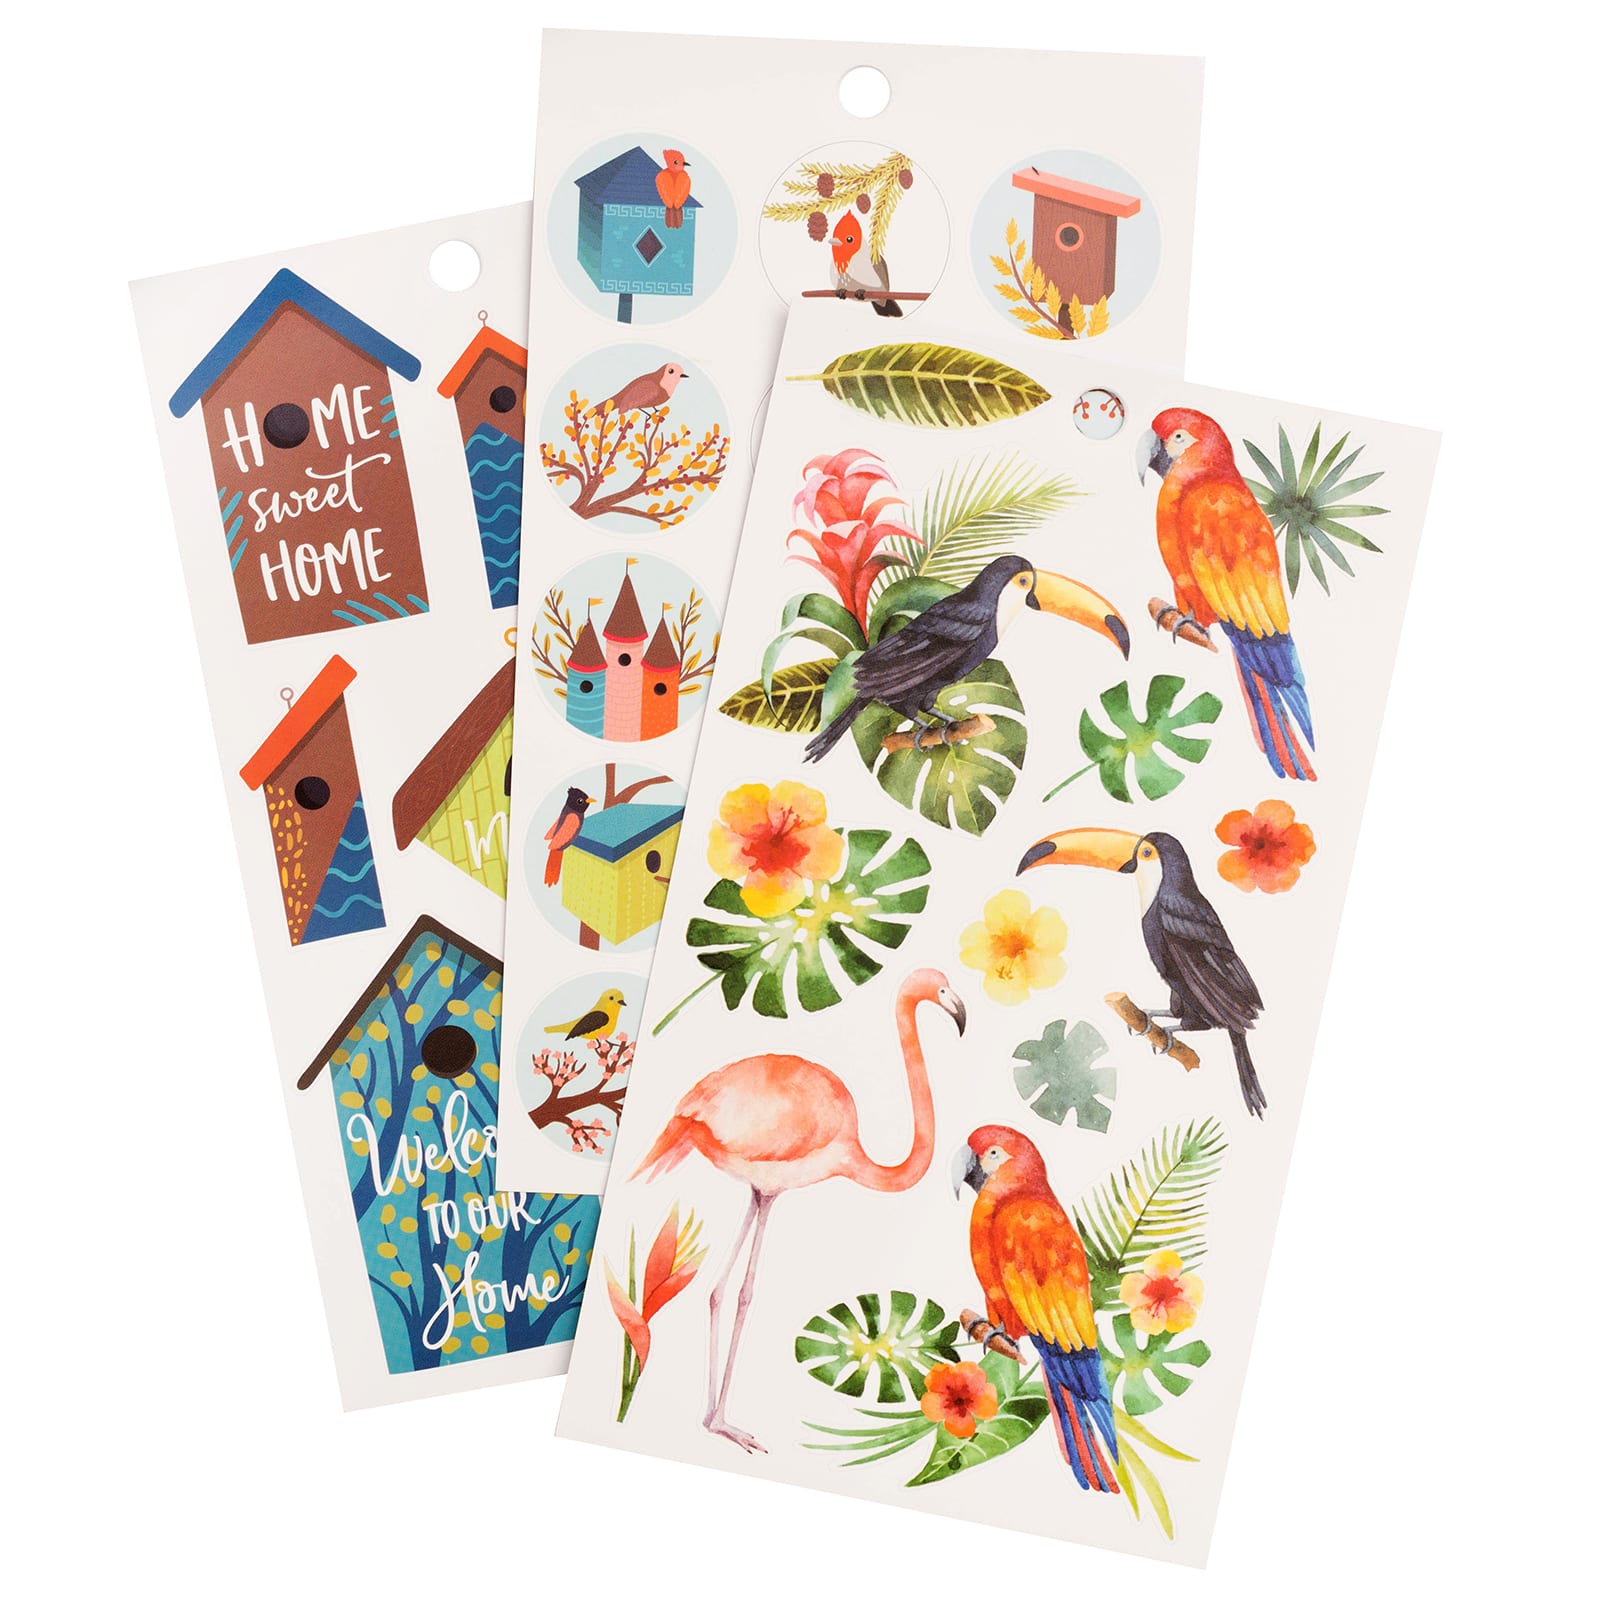 Recollections Bird Stickers - Each